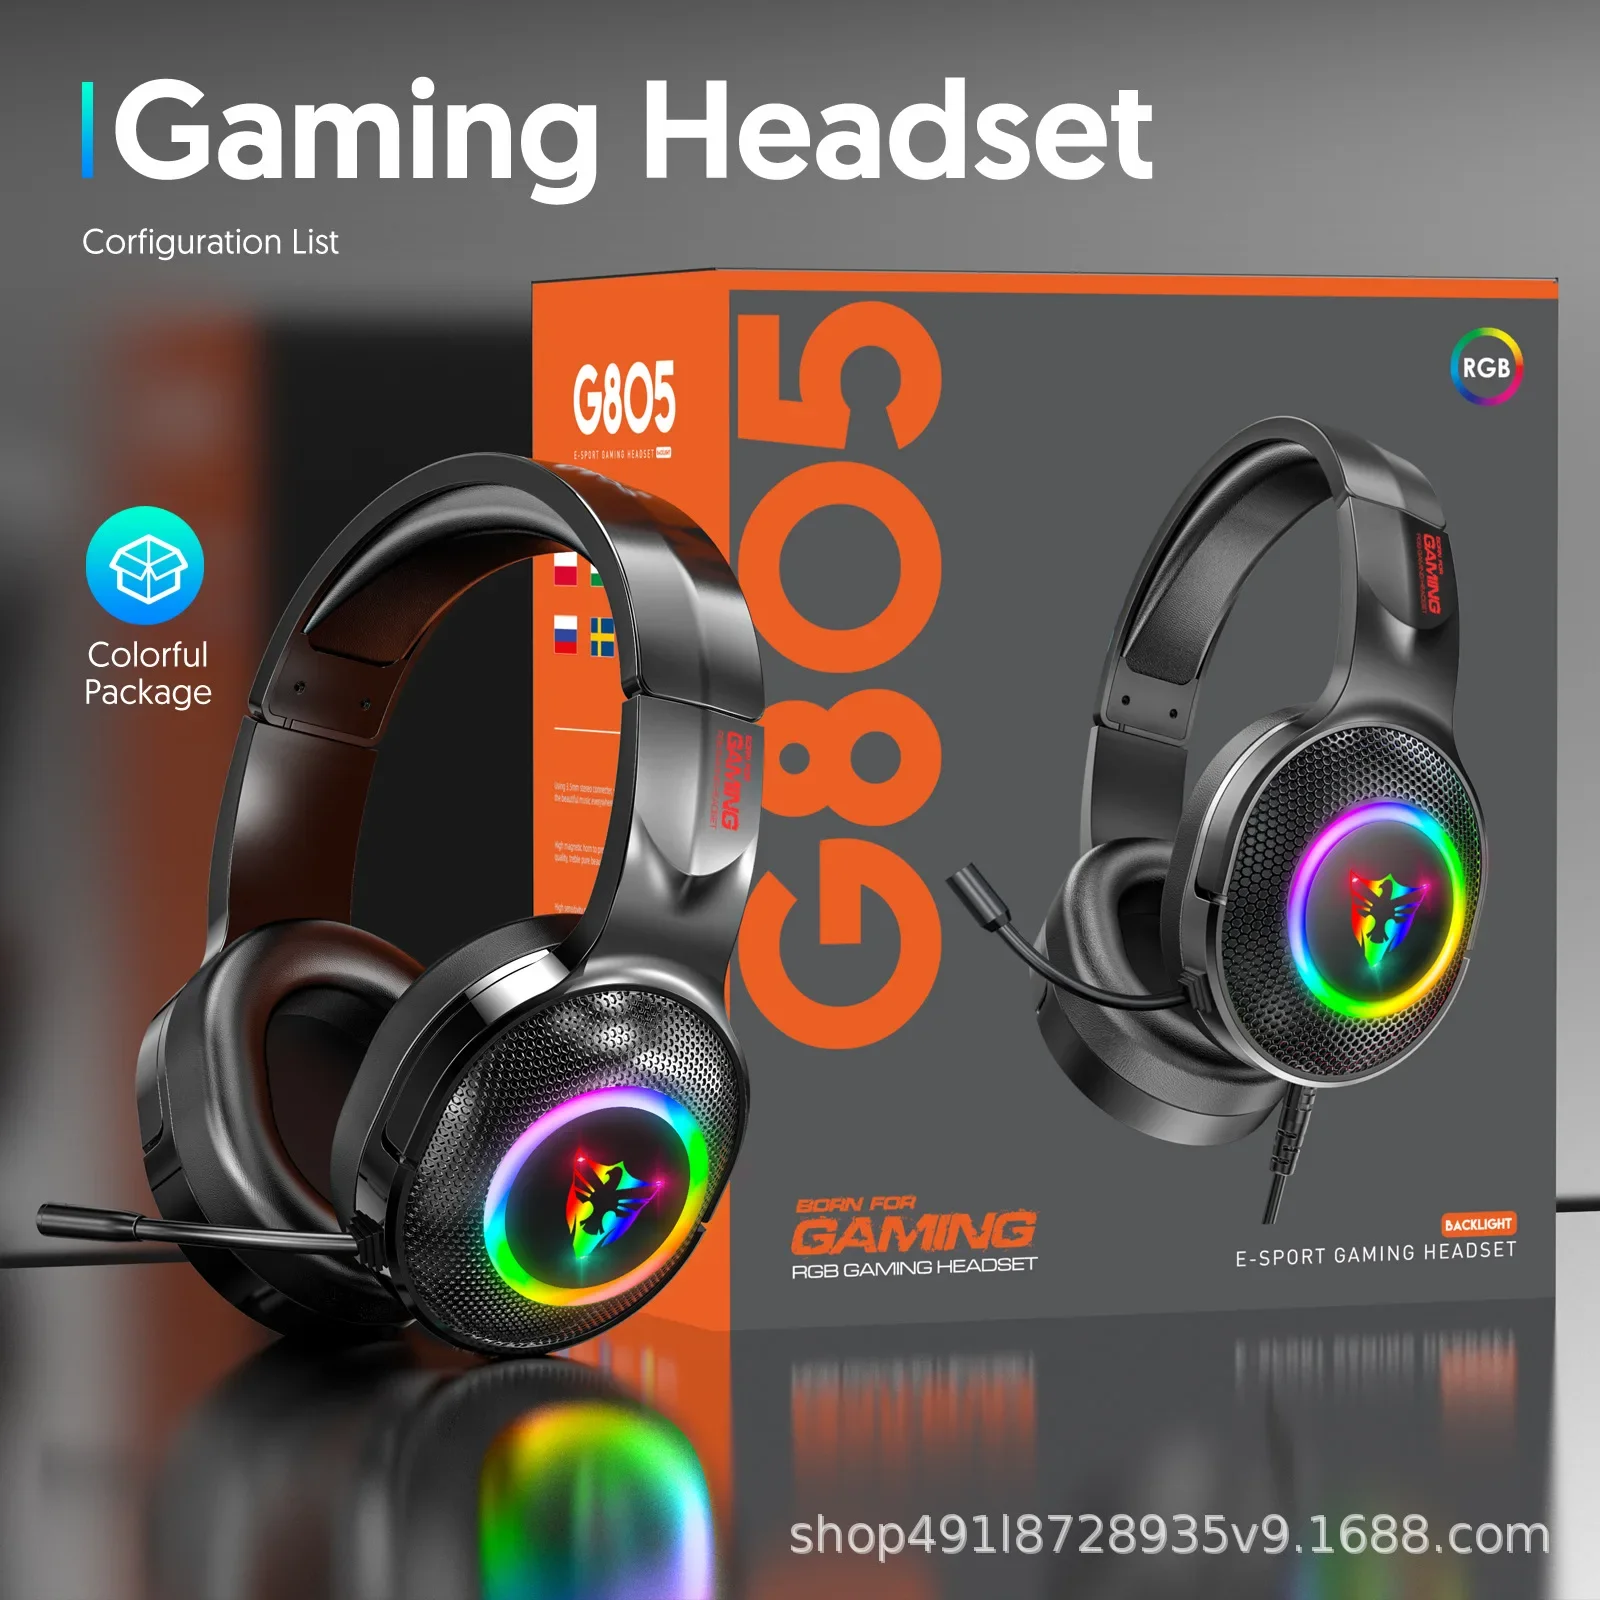 

Gaming Headphone G803 USB7.1 RGB 3.5mm Surround Sound Computer PC Headset Earphones Microphone for PS4 Switch Xbox-one PC